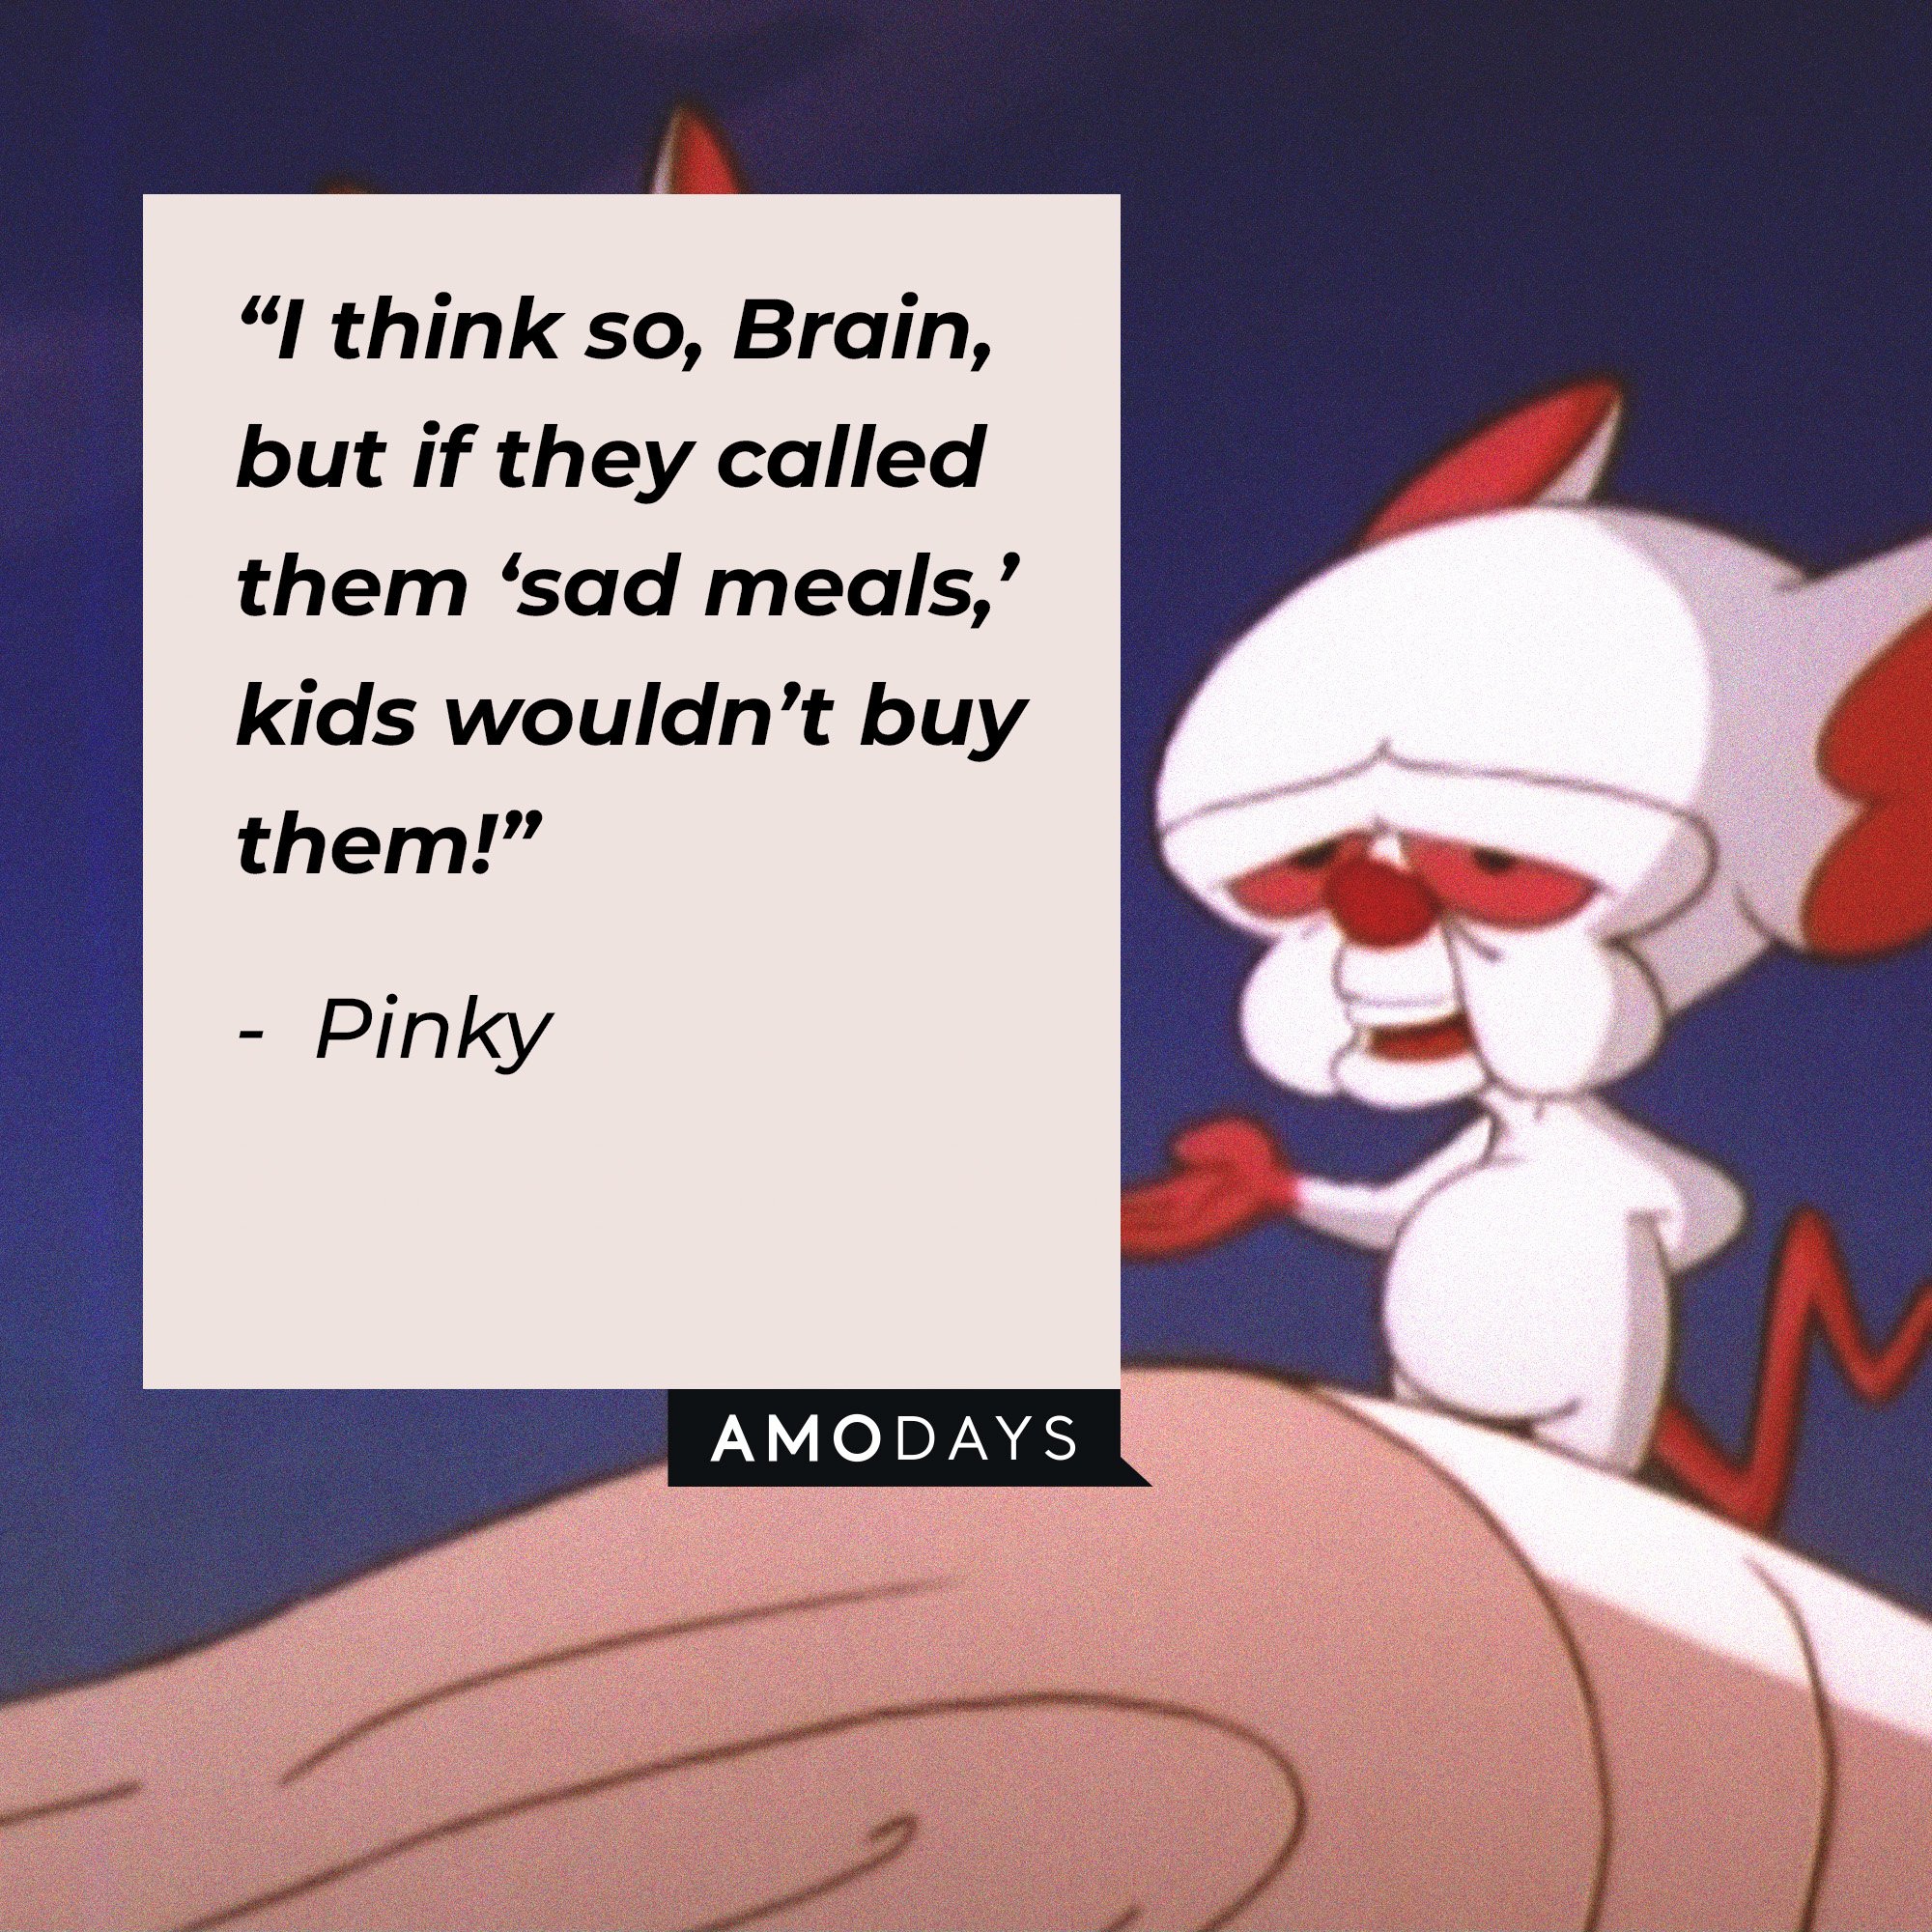 Pinky's quote: “I think so, Brain, but if they called them ‘sad meals,’ kids wouldn’t buy them!” | Image: AmoDays